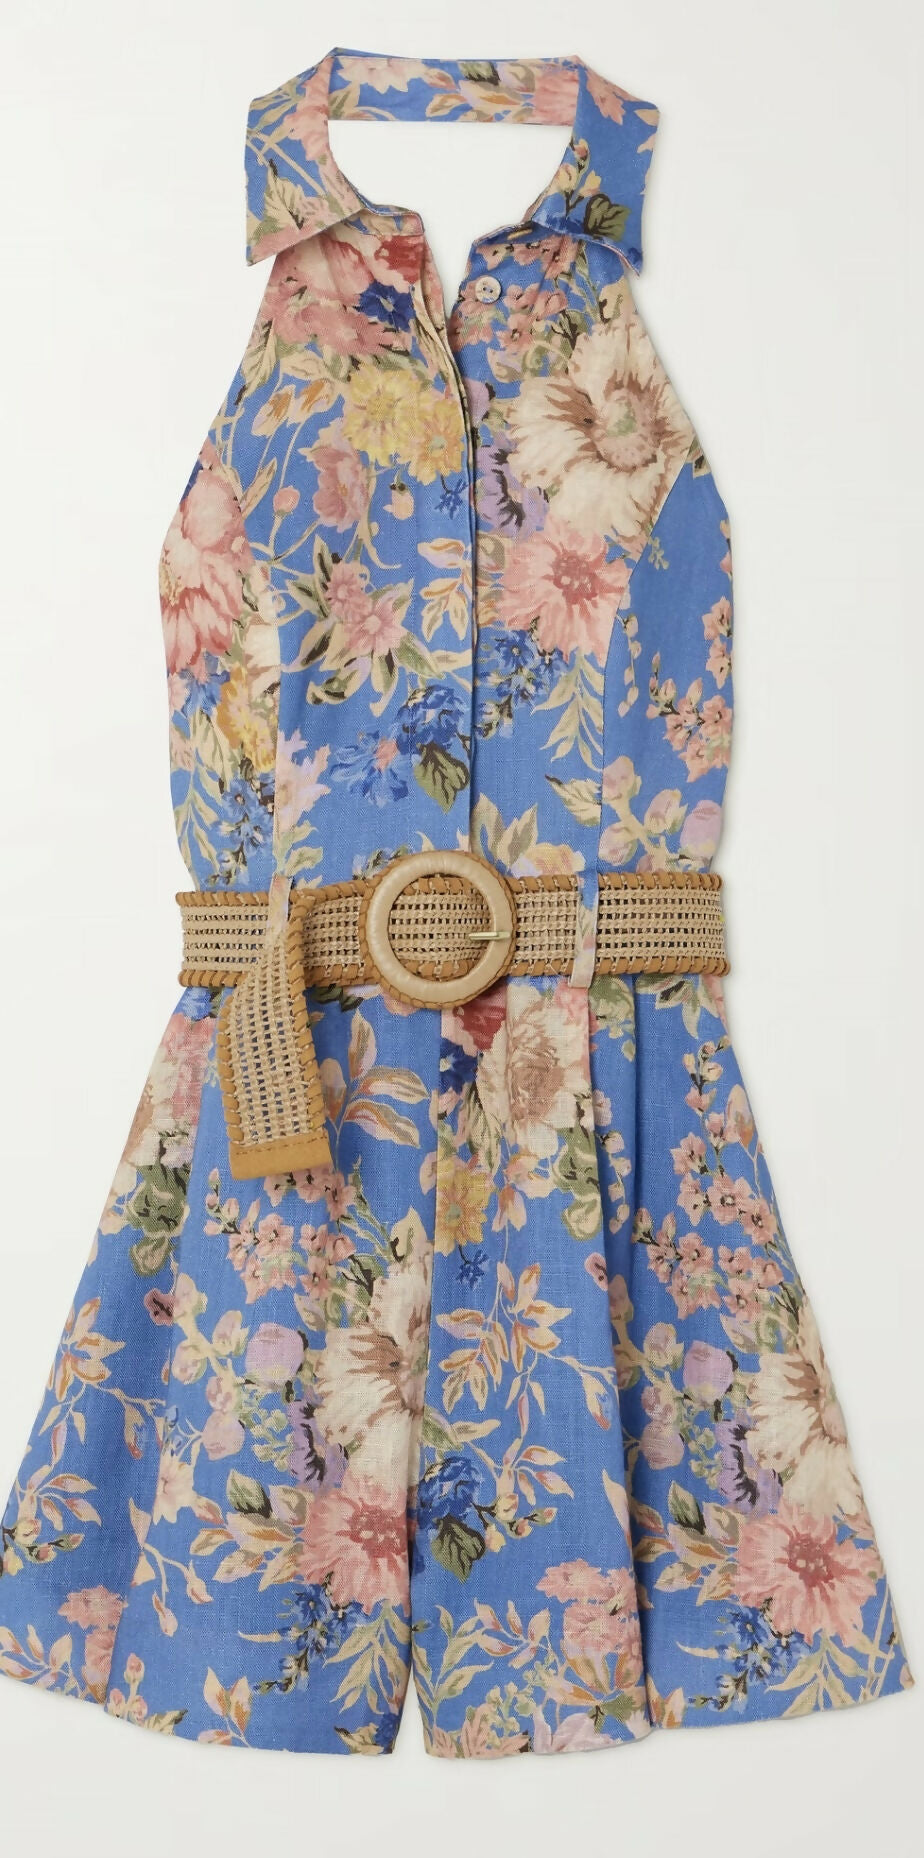 Zimmermann Netaporter Exclusive August Belted Floral-Print